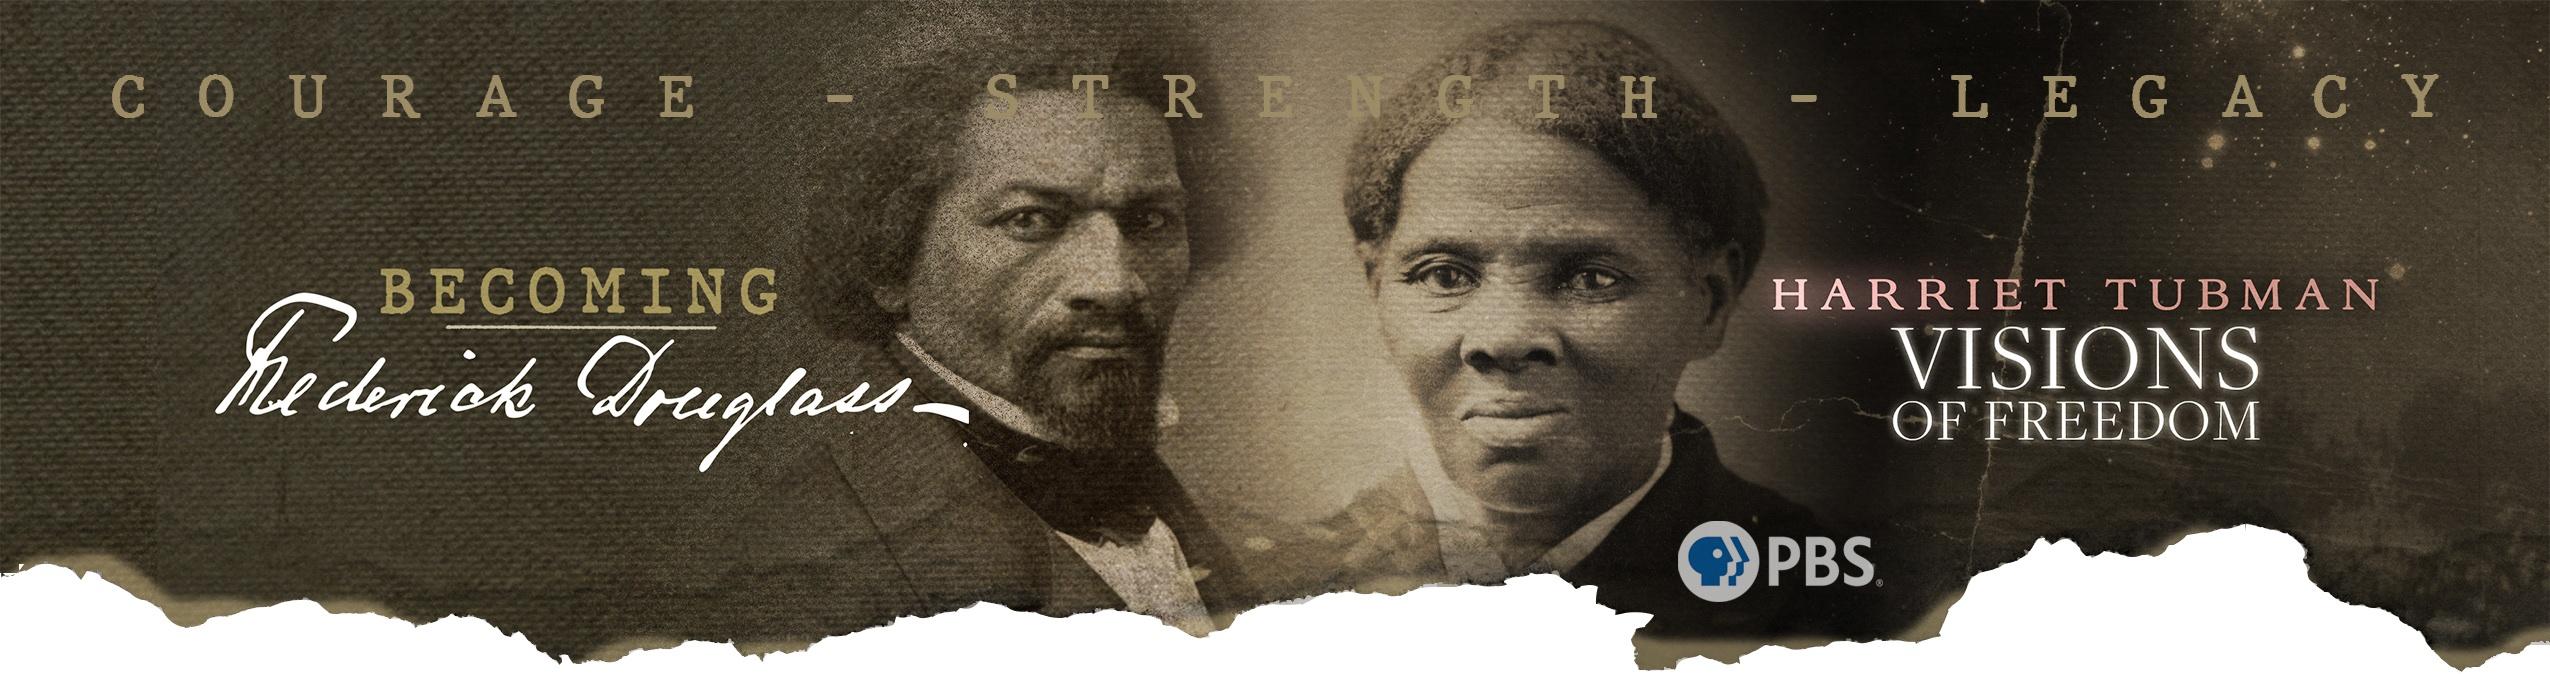 Courage-Strength-Legacy. Becoming Frederick Douglass, Harriet Tubman: Visions of Freedom.